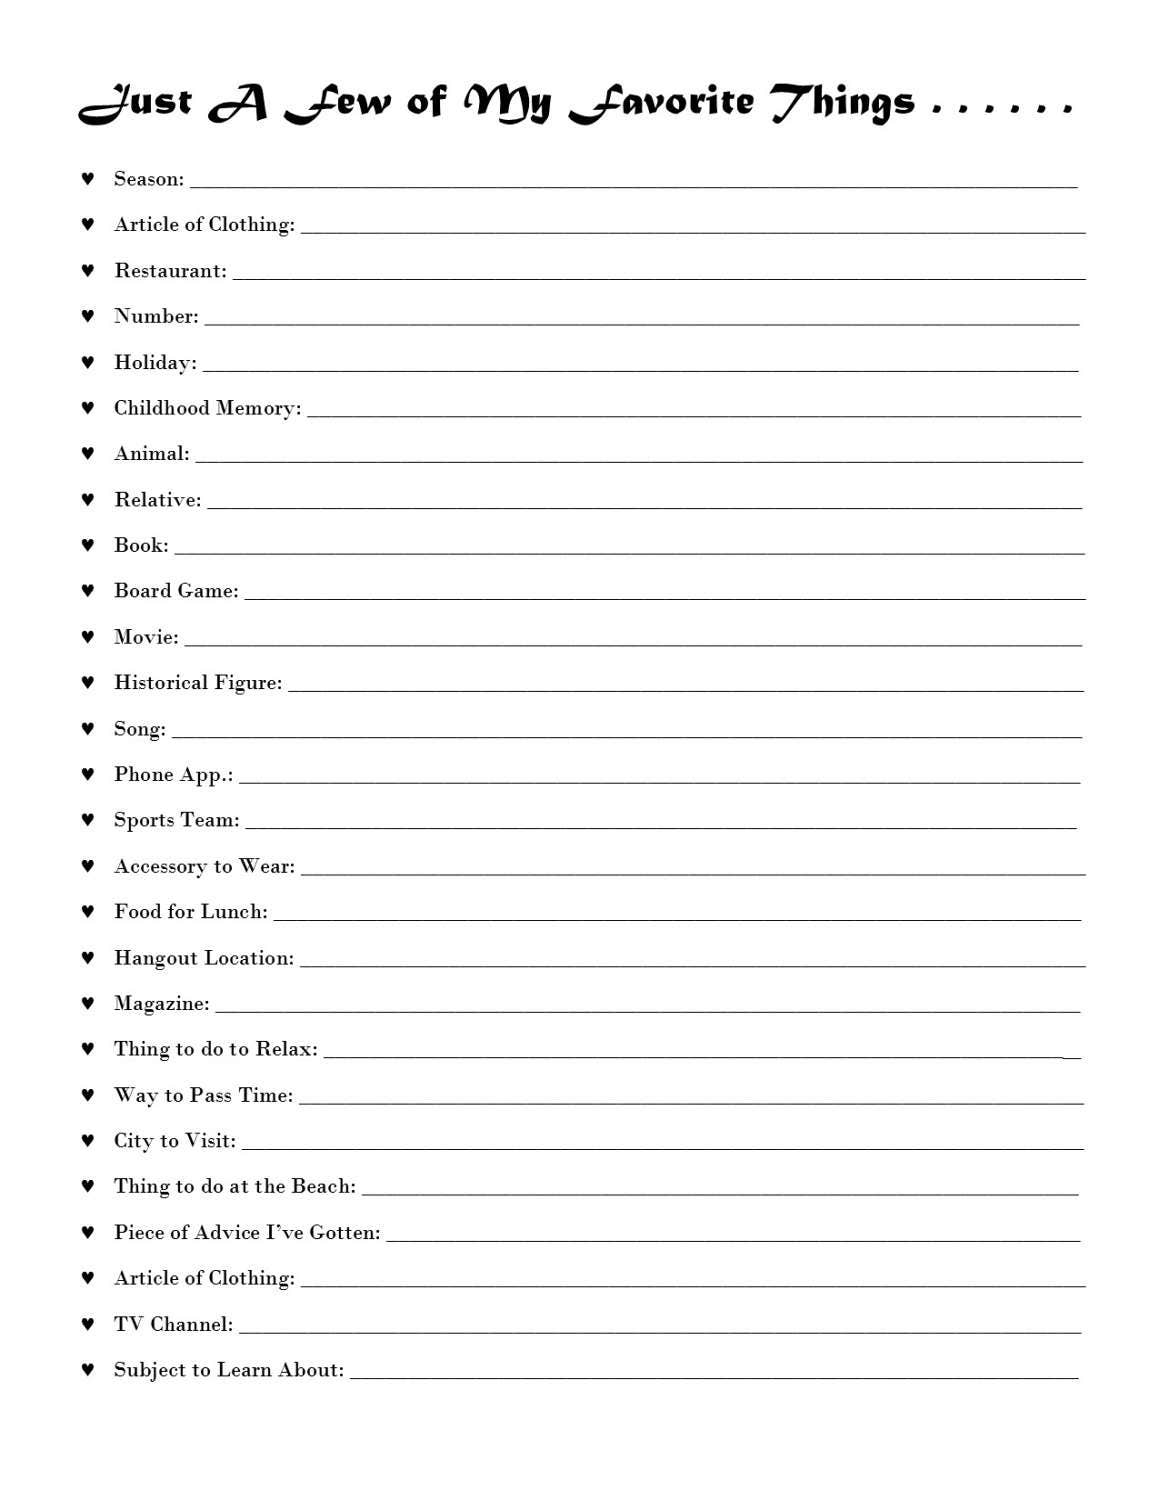 just-a-few-of-my-favorite-things-printable